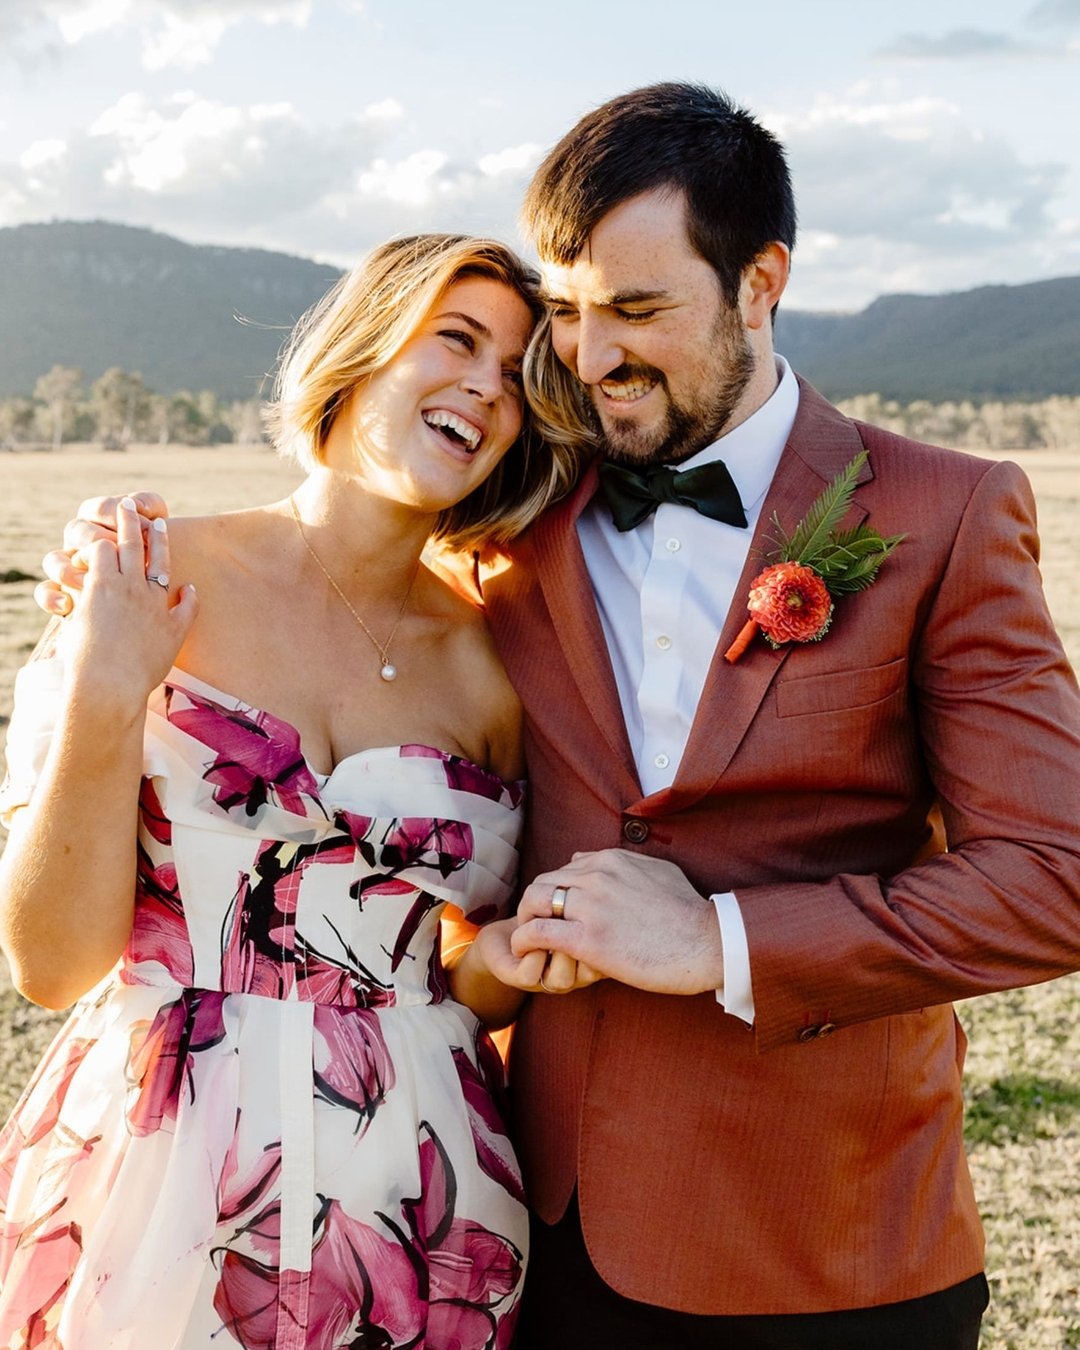 Colourfest incoming! Issy and Matt had the most beautiful vision for their wedding day! Colour, fun, chilled out and party!!! When I saw Issy's beautiful @_aje_ dress and vintage veil I was blown away. Obsessed with the colour palette and these two b